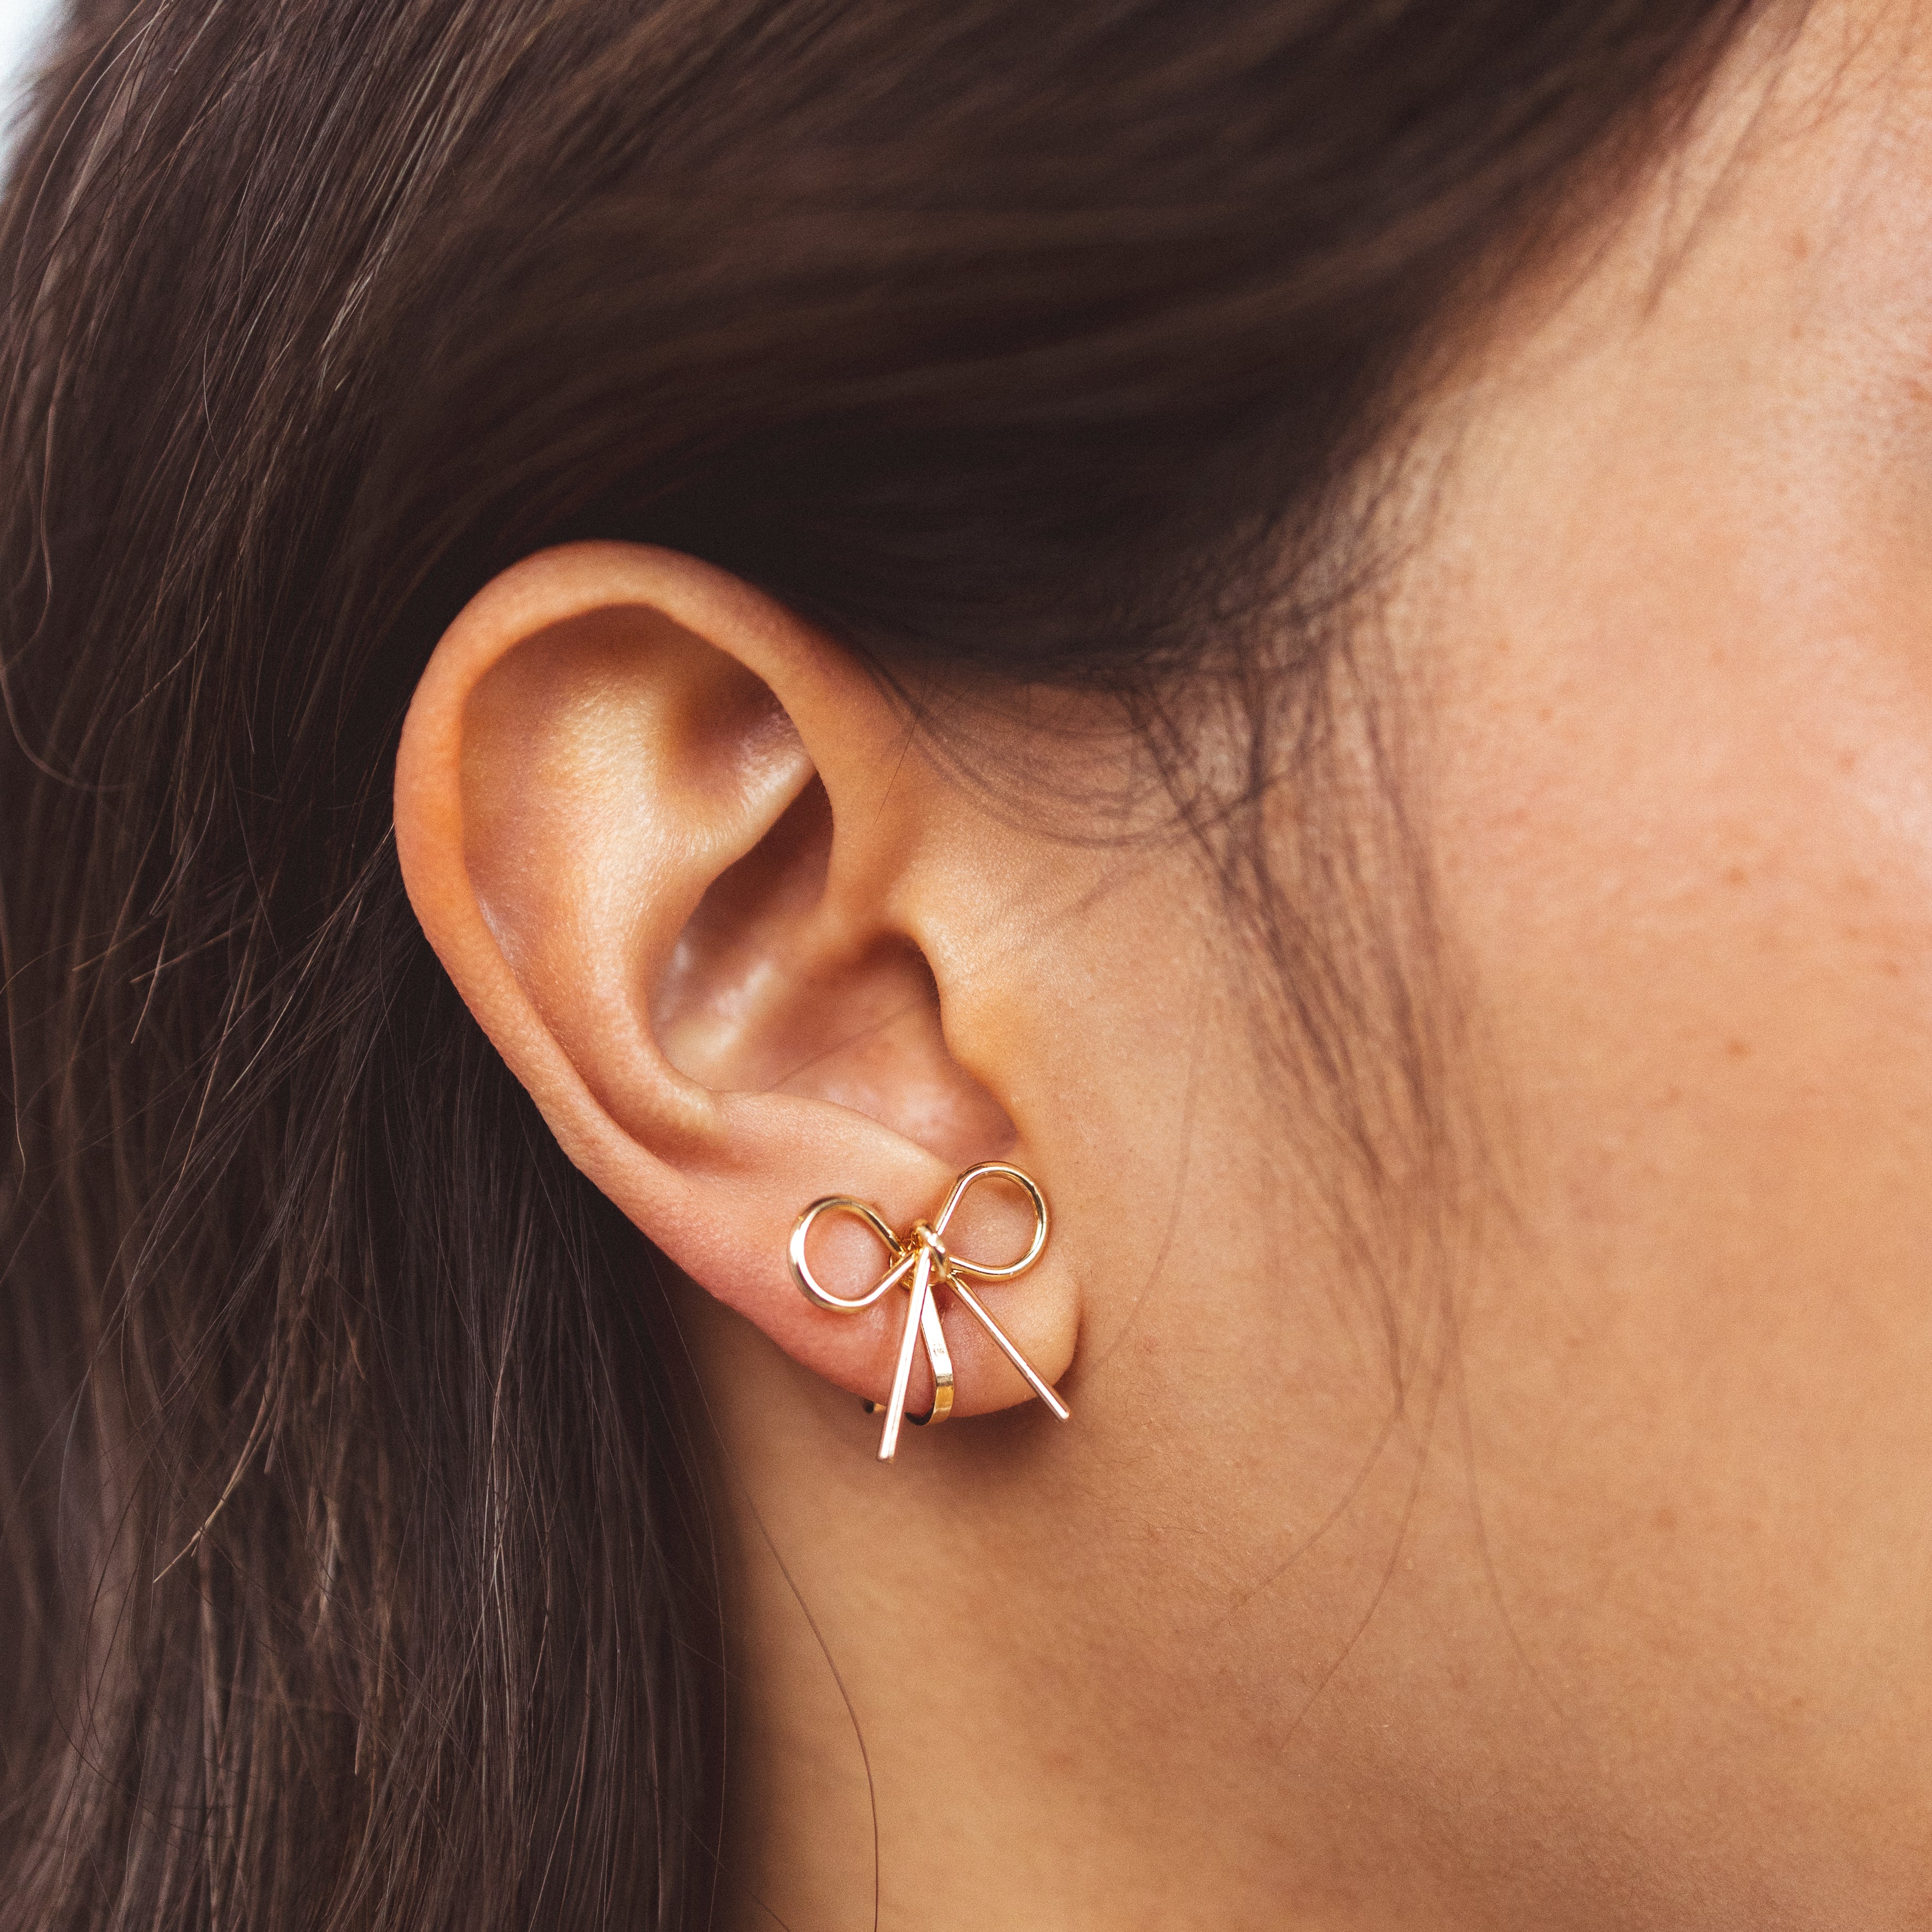 A model wearing the Celia Clip On Earrings. Designed with a 24-hour hold and adjustable fit, these earrings are perfect for sensitive or stretched ears. Elevate your style with elegance and comfort.